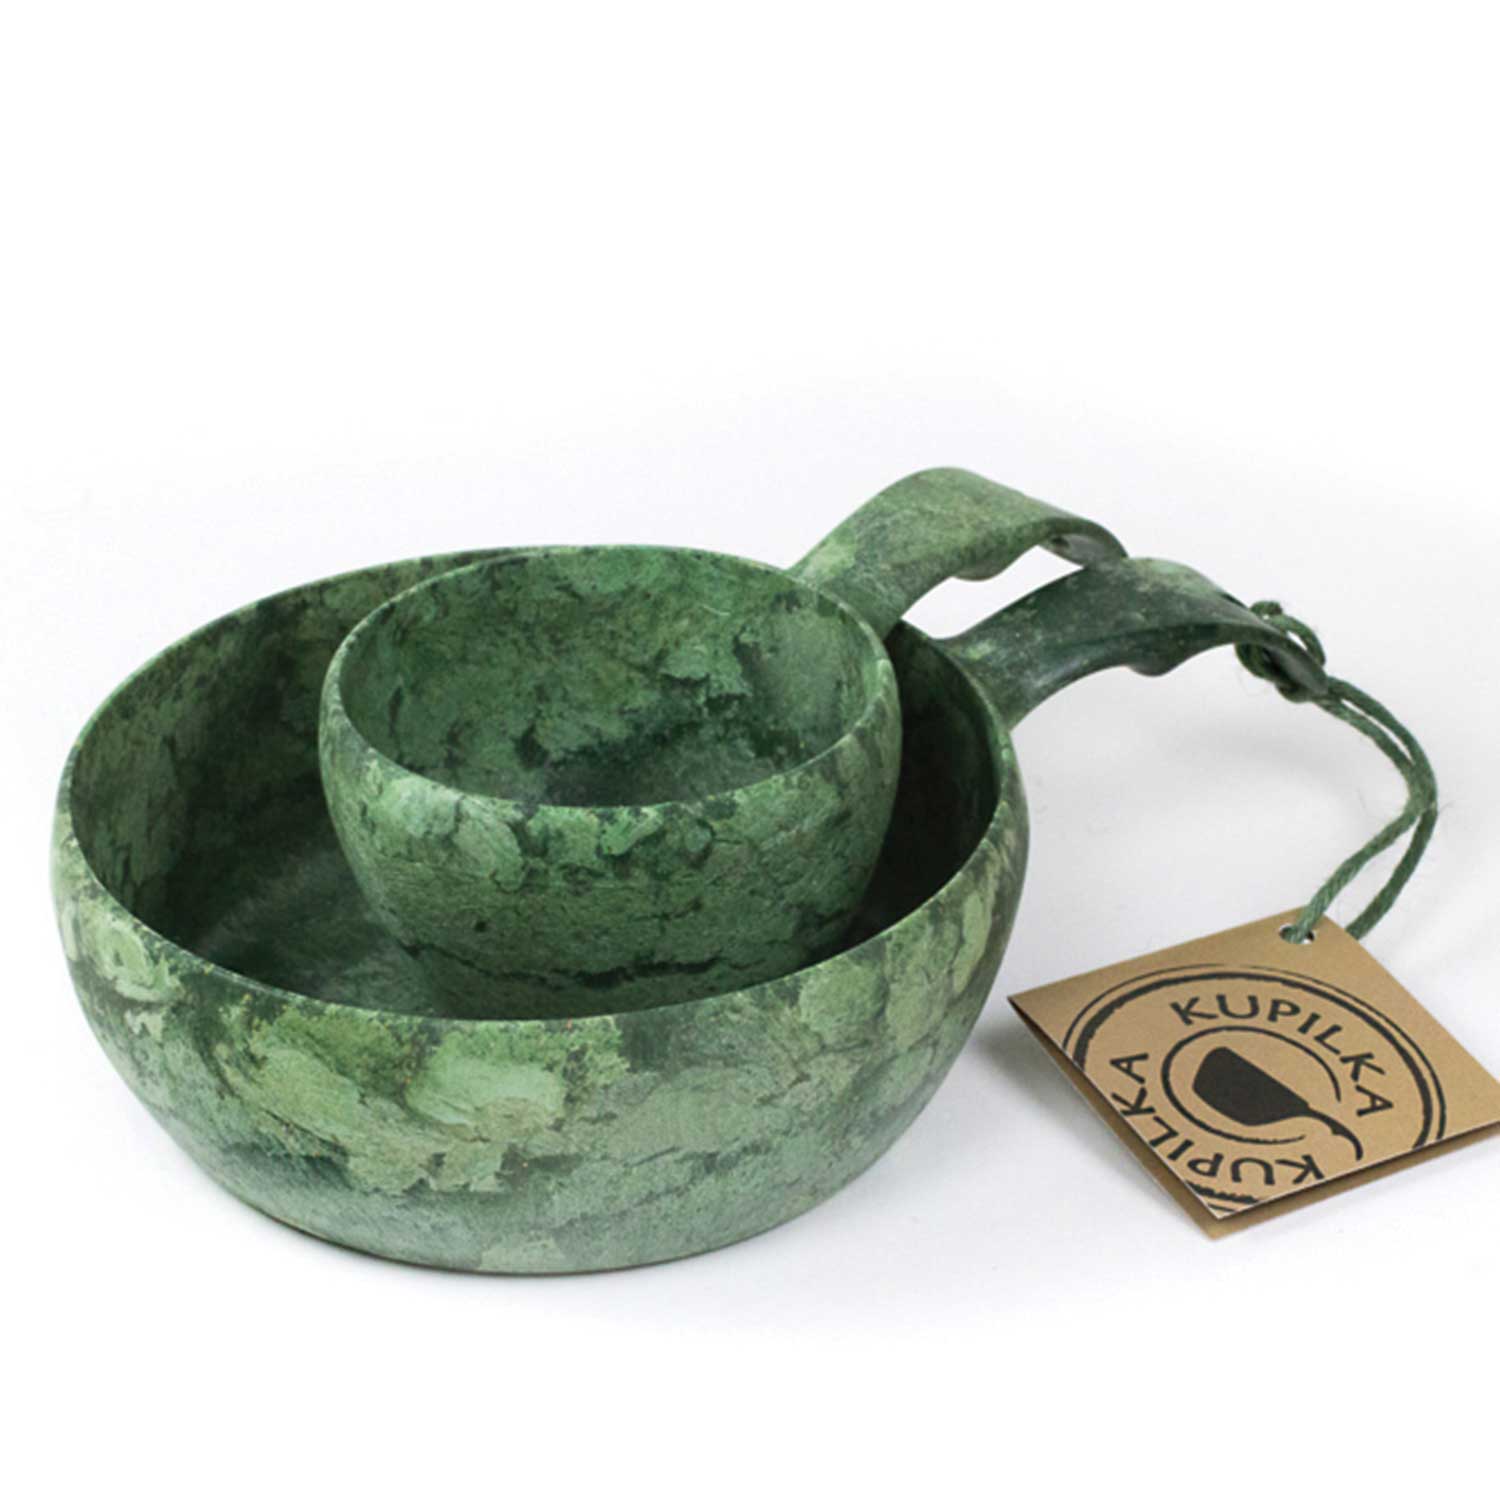 Kupilka 55 Recyclable Bowl Outdoor Bowl made of Organic Material